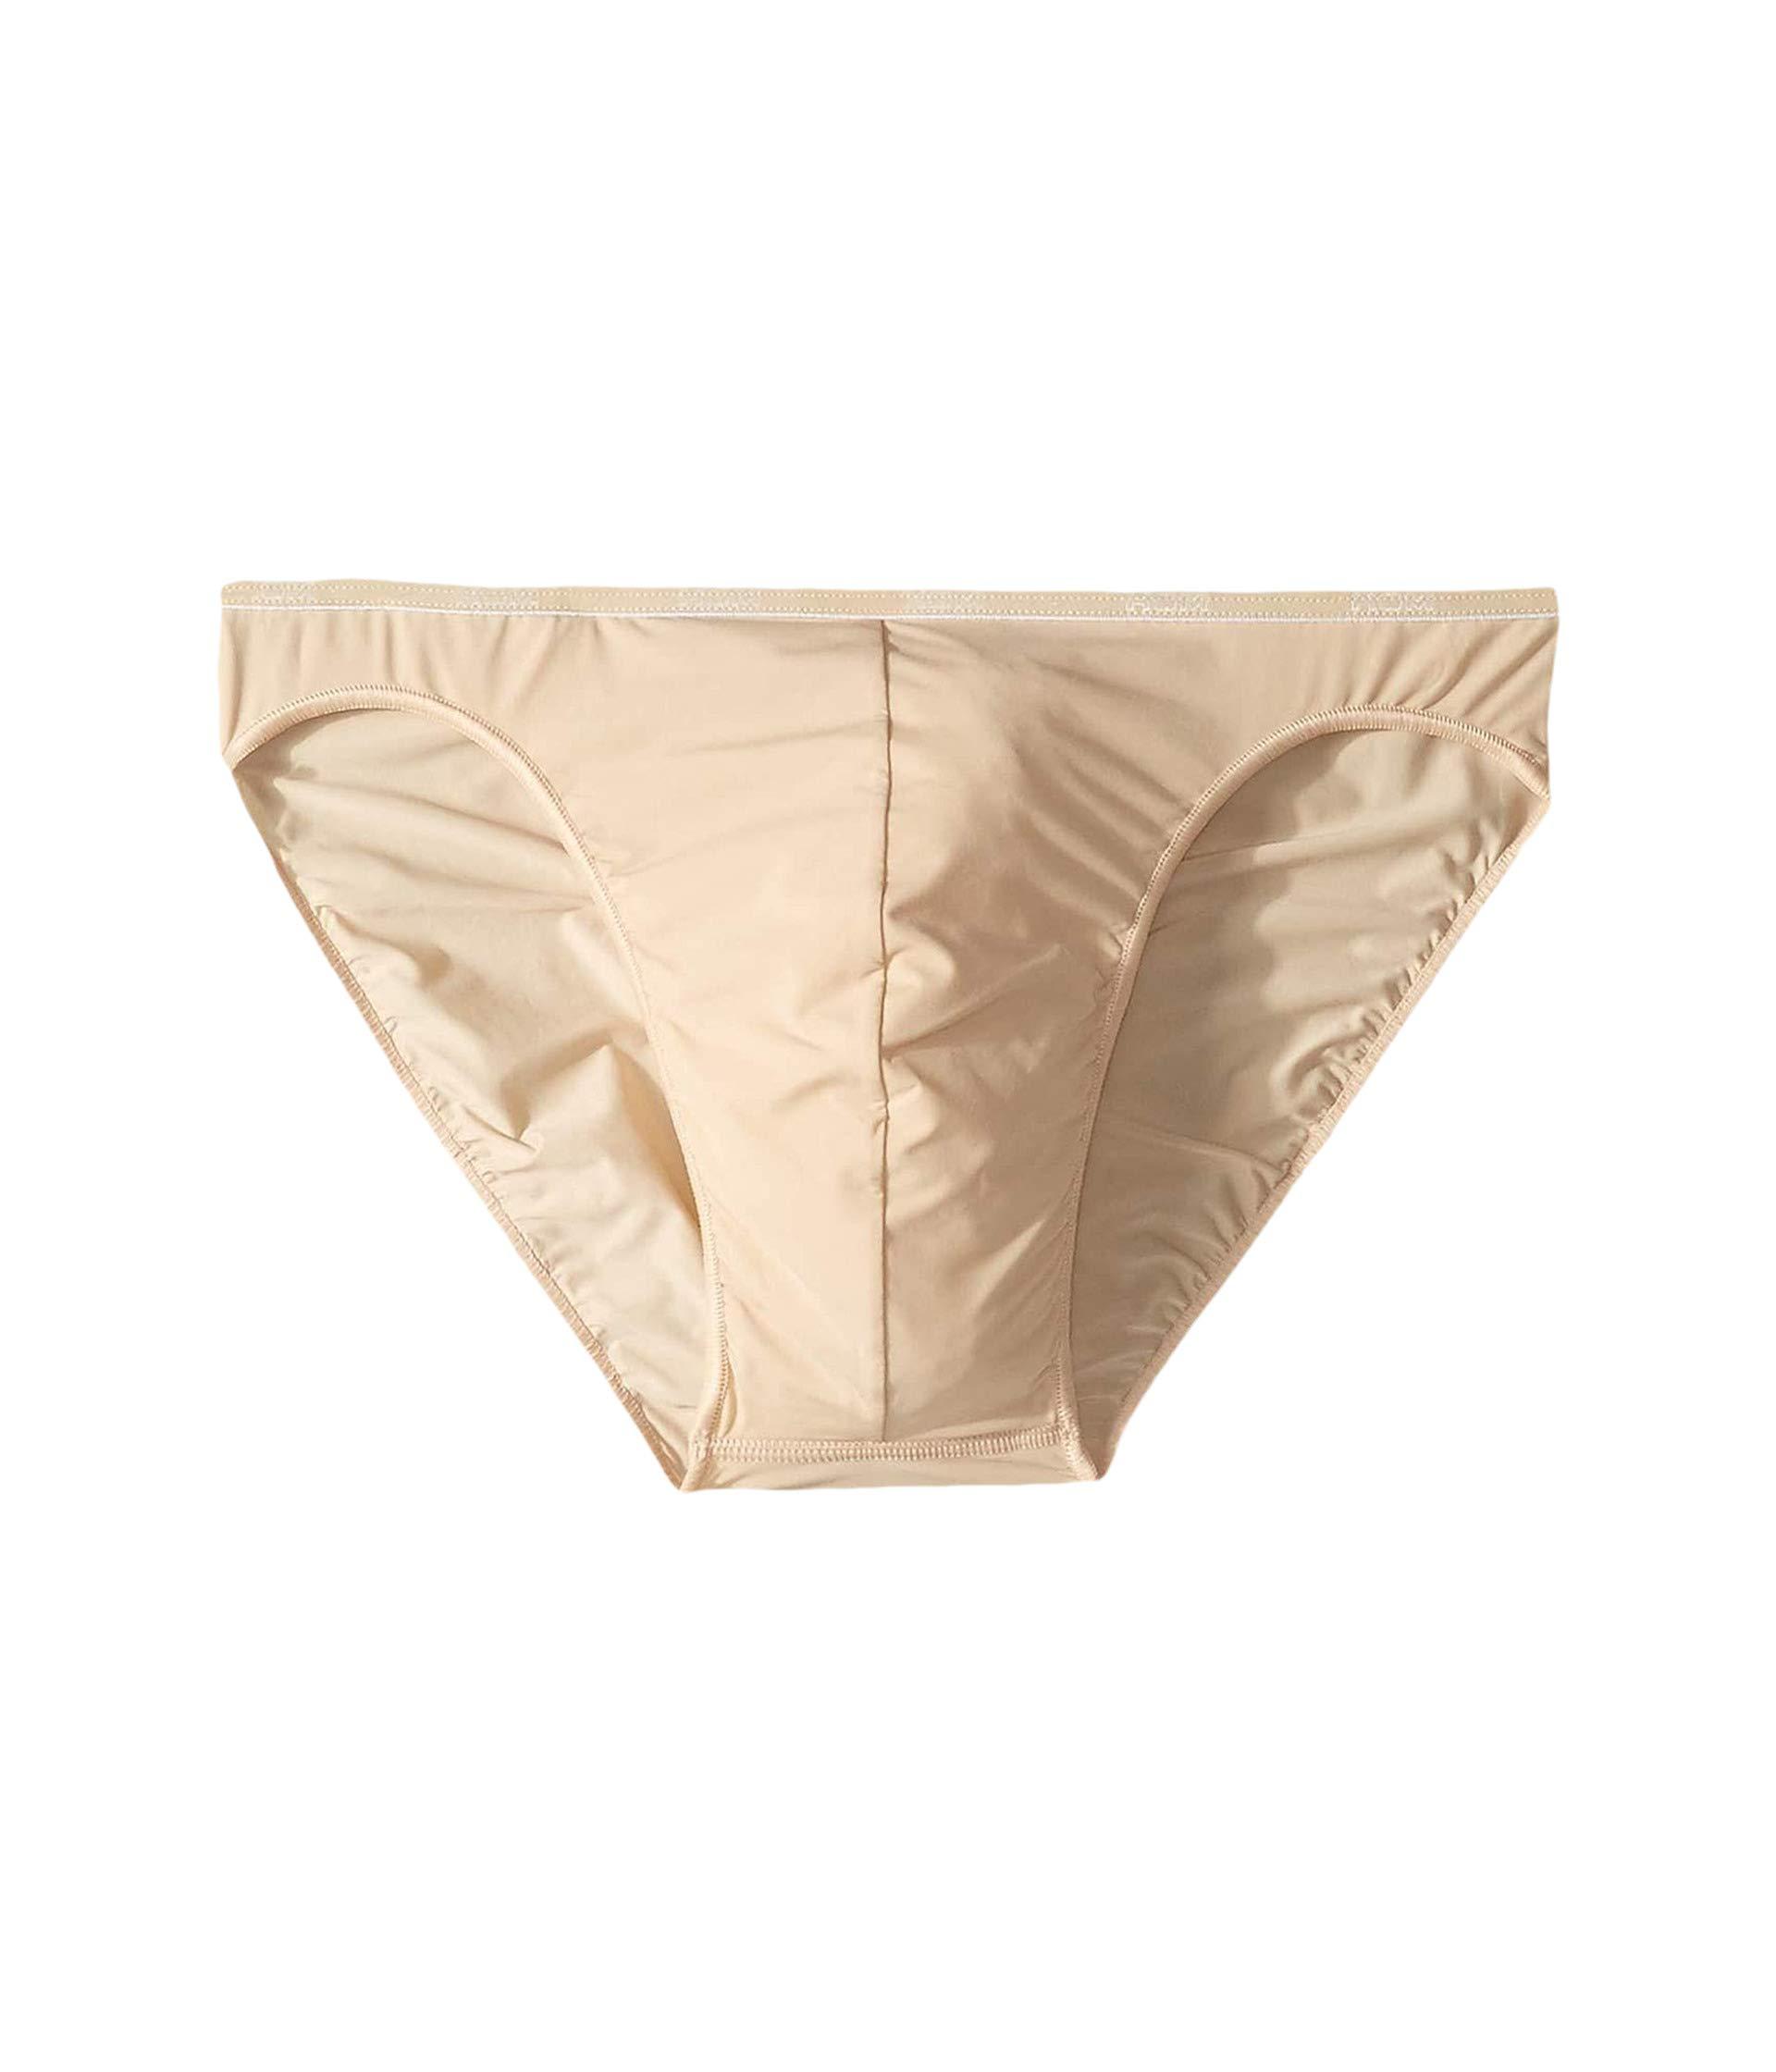 Hom Synthetic Plumes Micro Briefs in Beige (Natural) for Men - Lyst